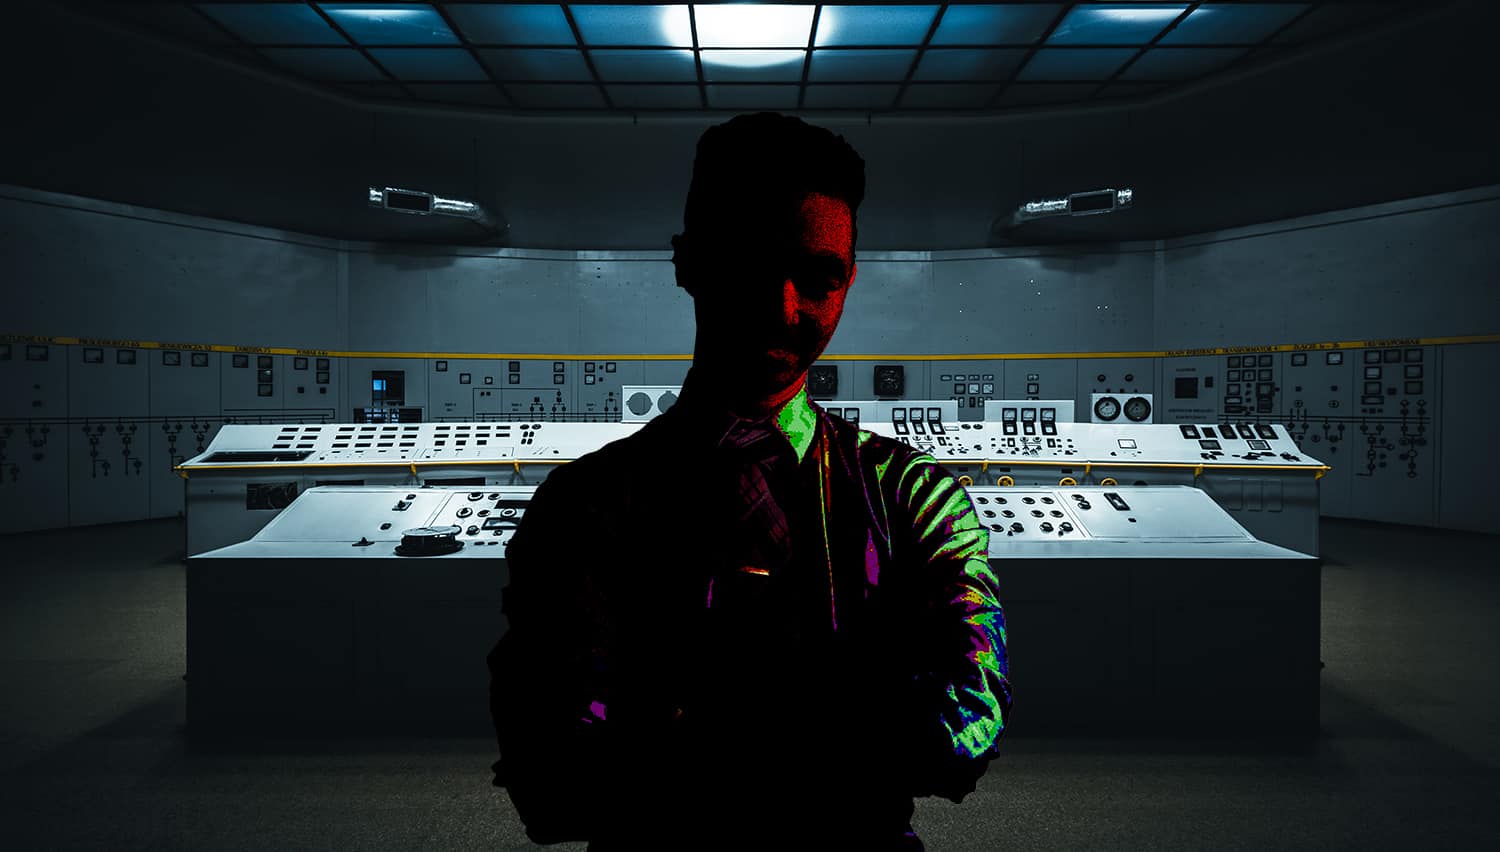 Image of a man covered in shadows inside of a control room